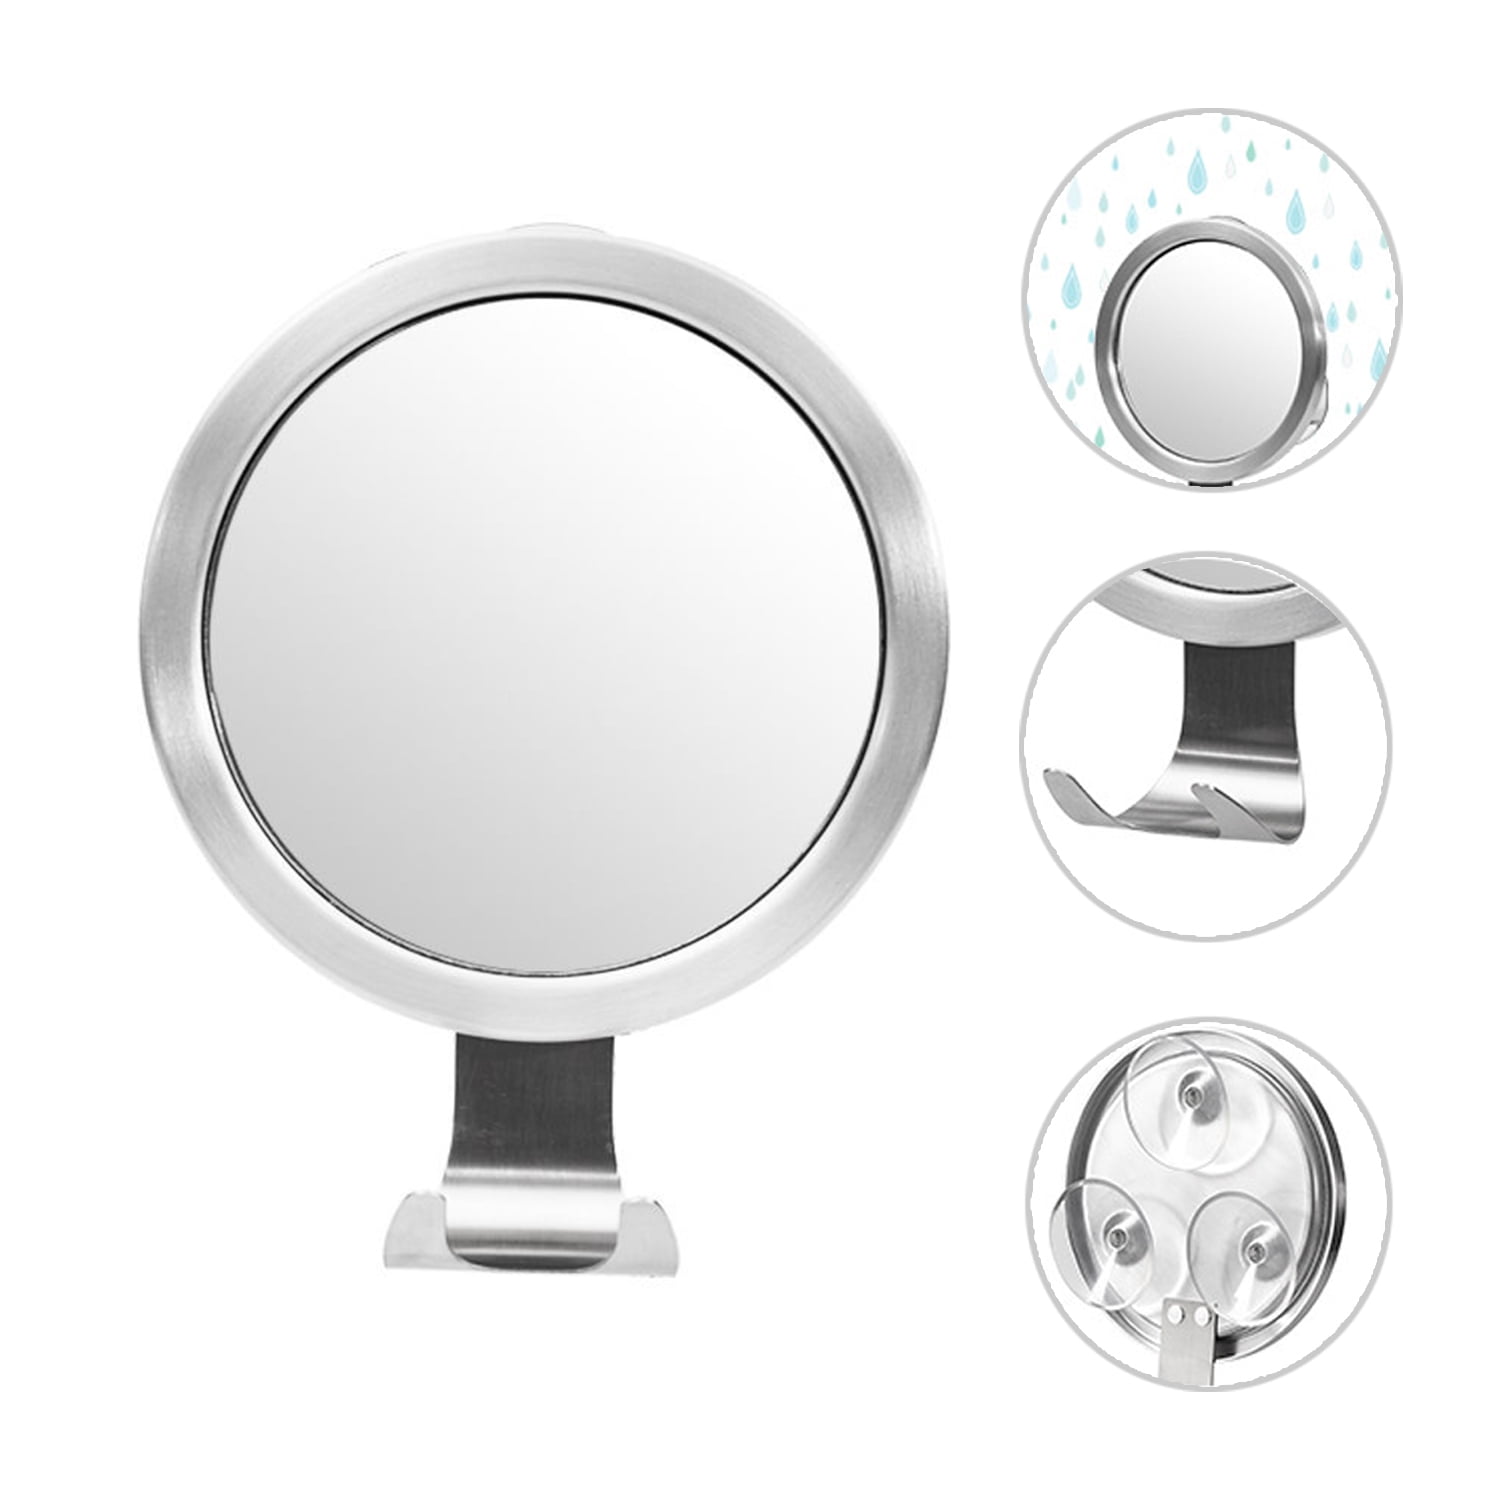 Shower Mirror Fogless With Razor Holder For Shaving No Drilling And Removable Fogless Mirror For 